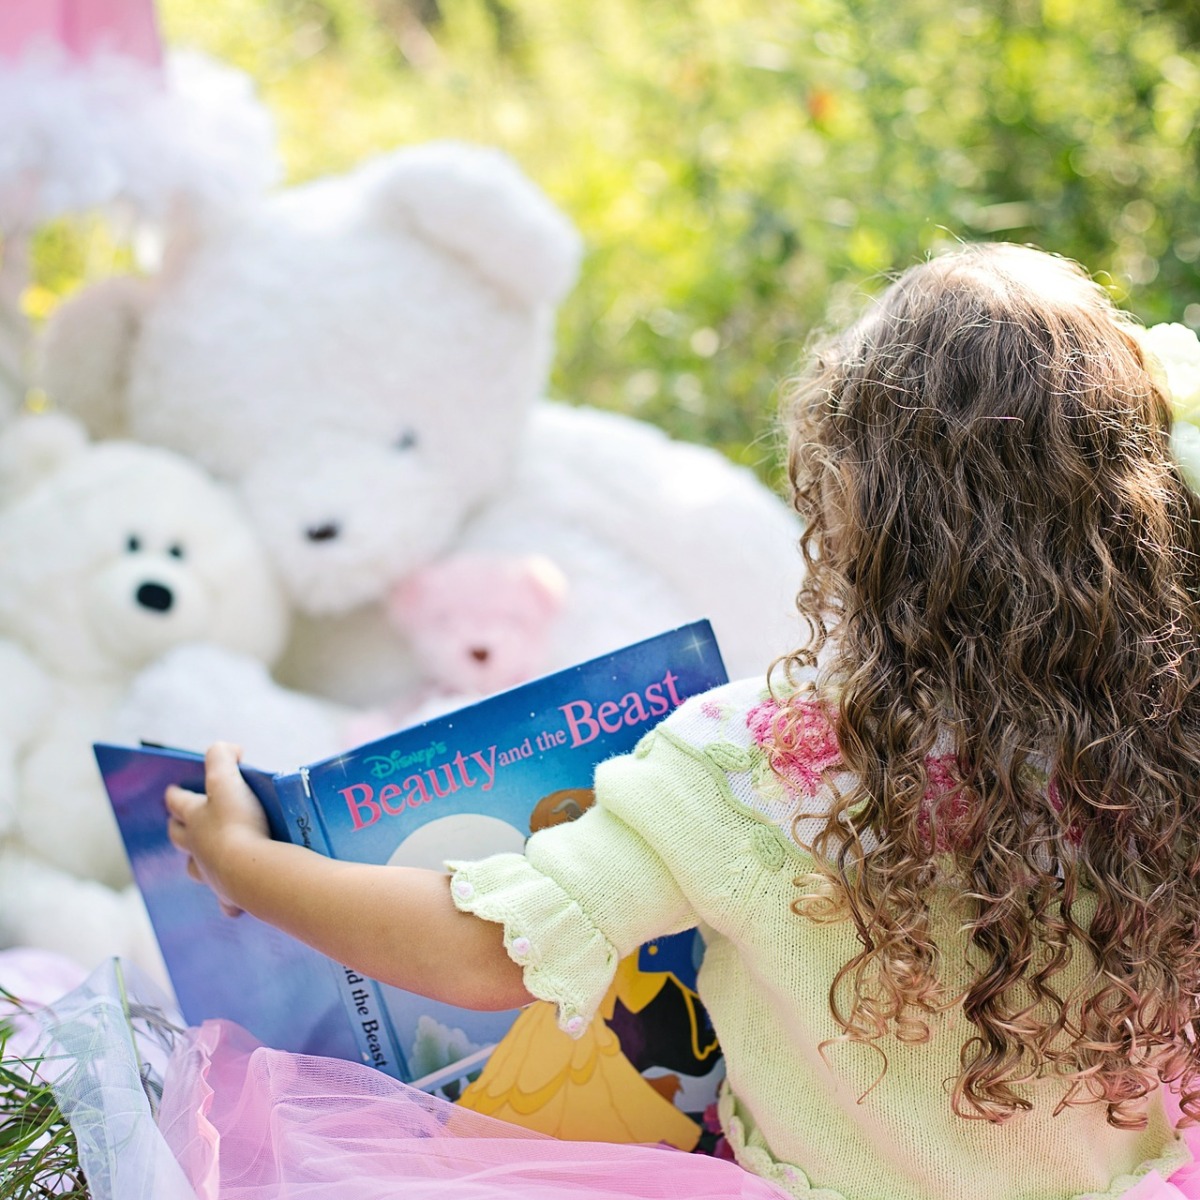 How to Choose Books at Your Child’s Reading Level